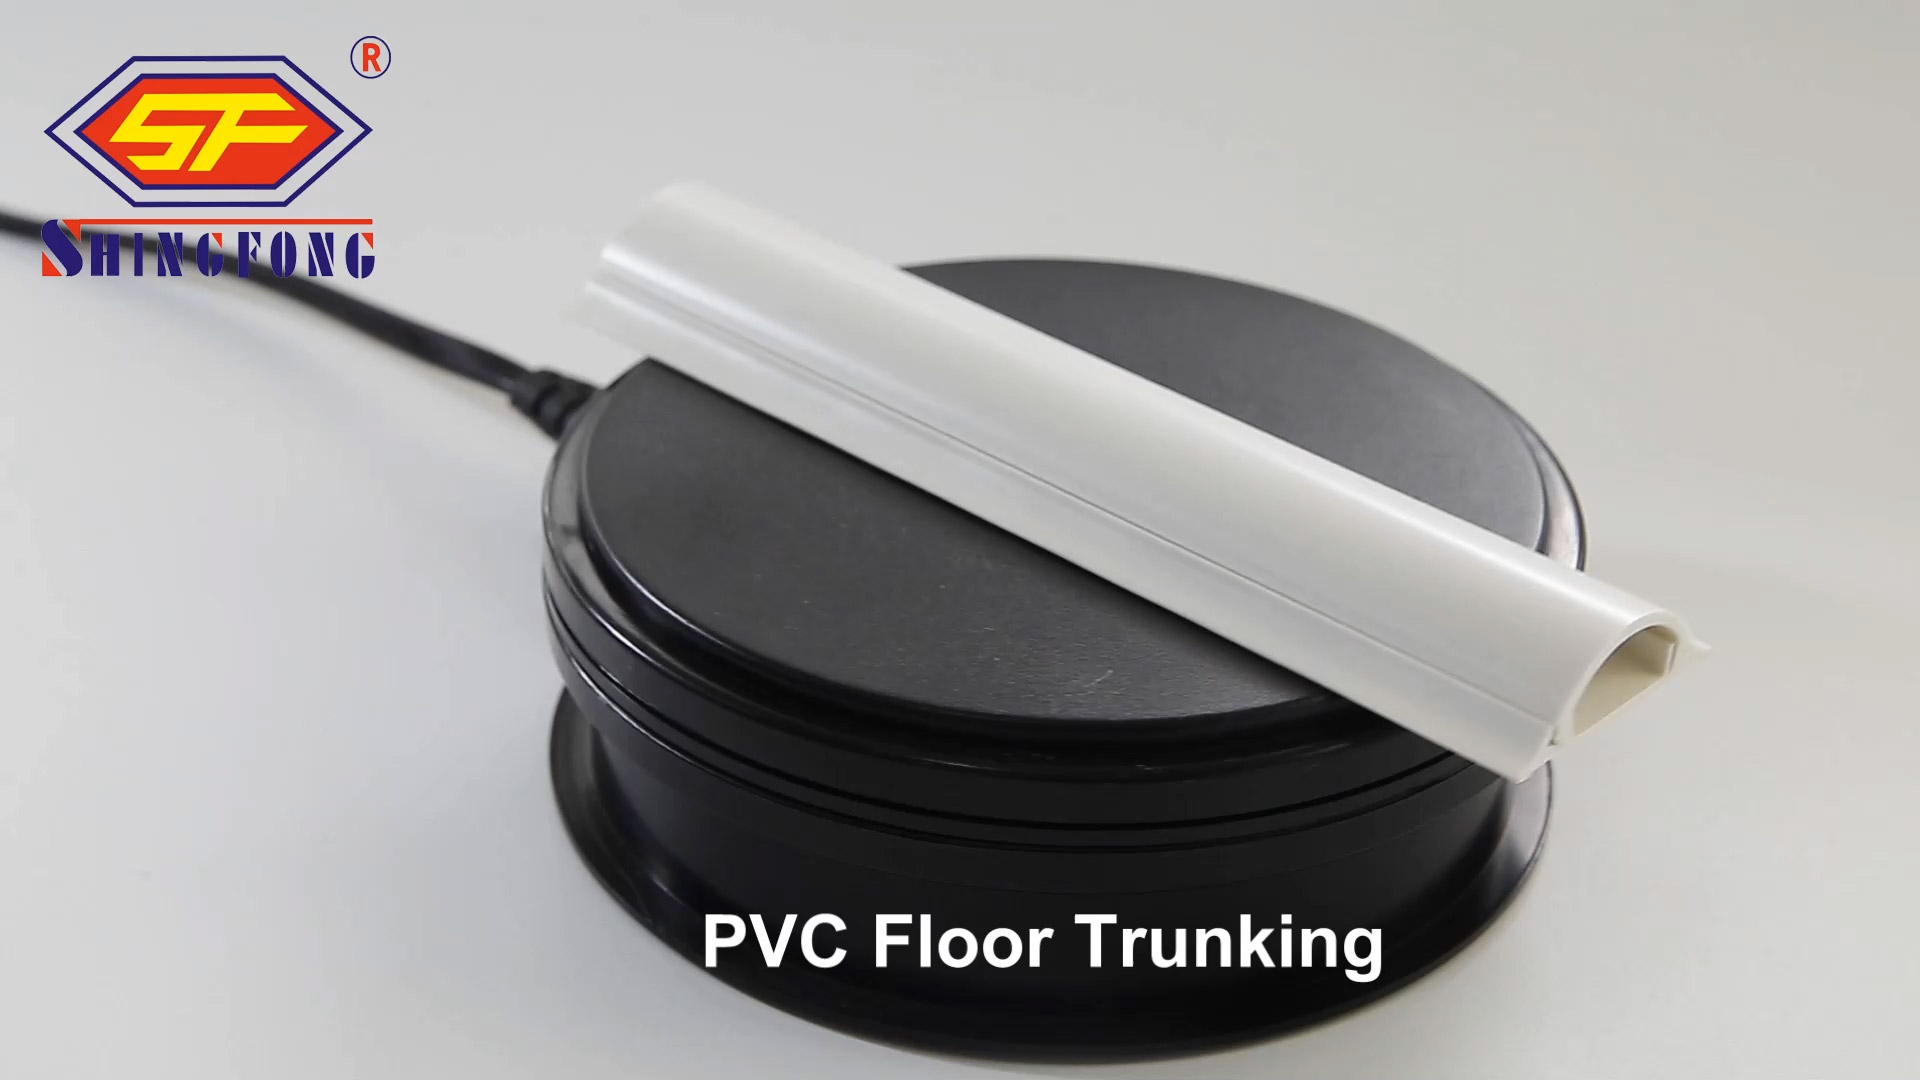 Professional PVC Floor Trunking manufacturers